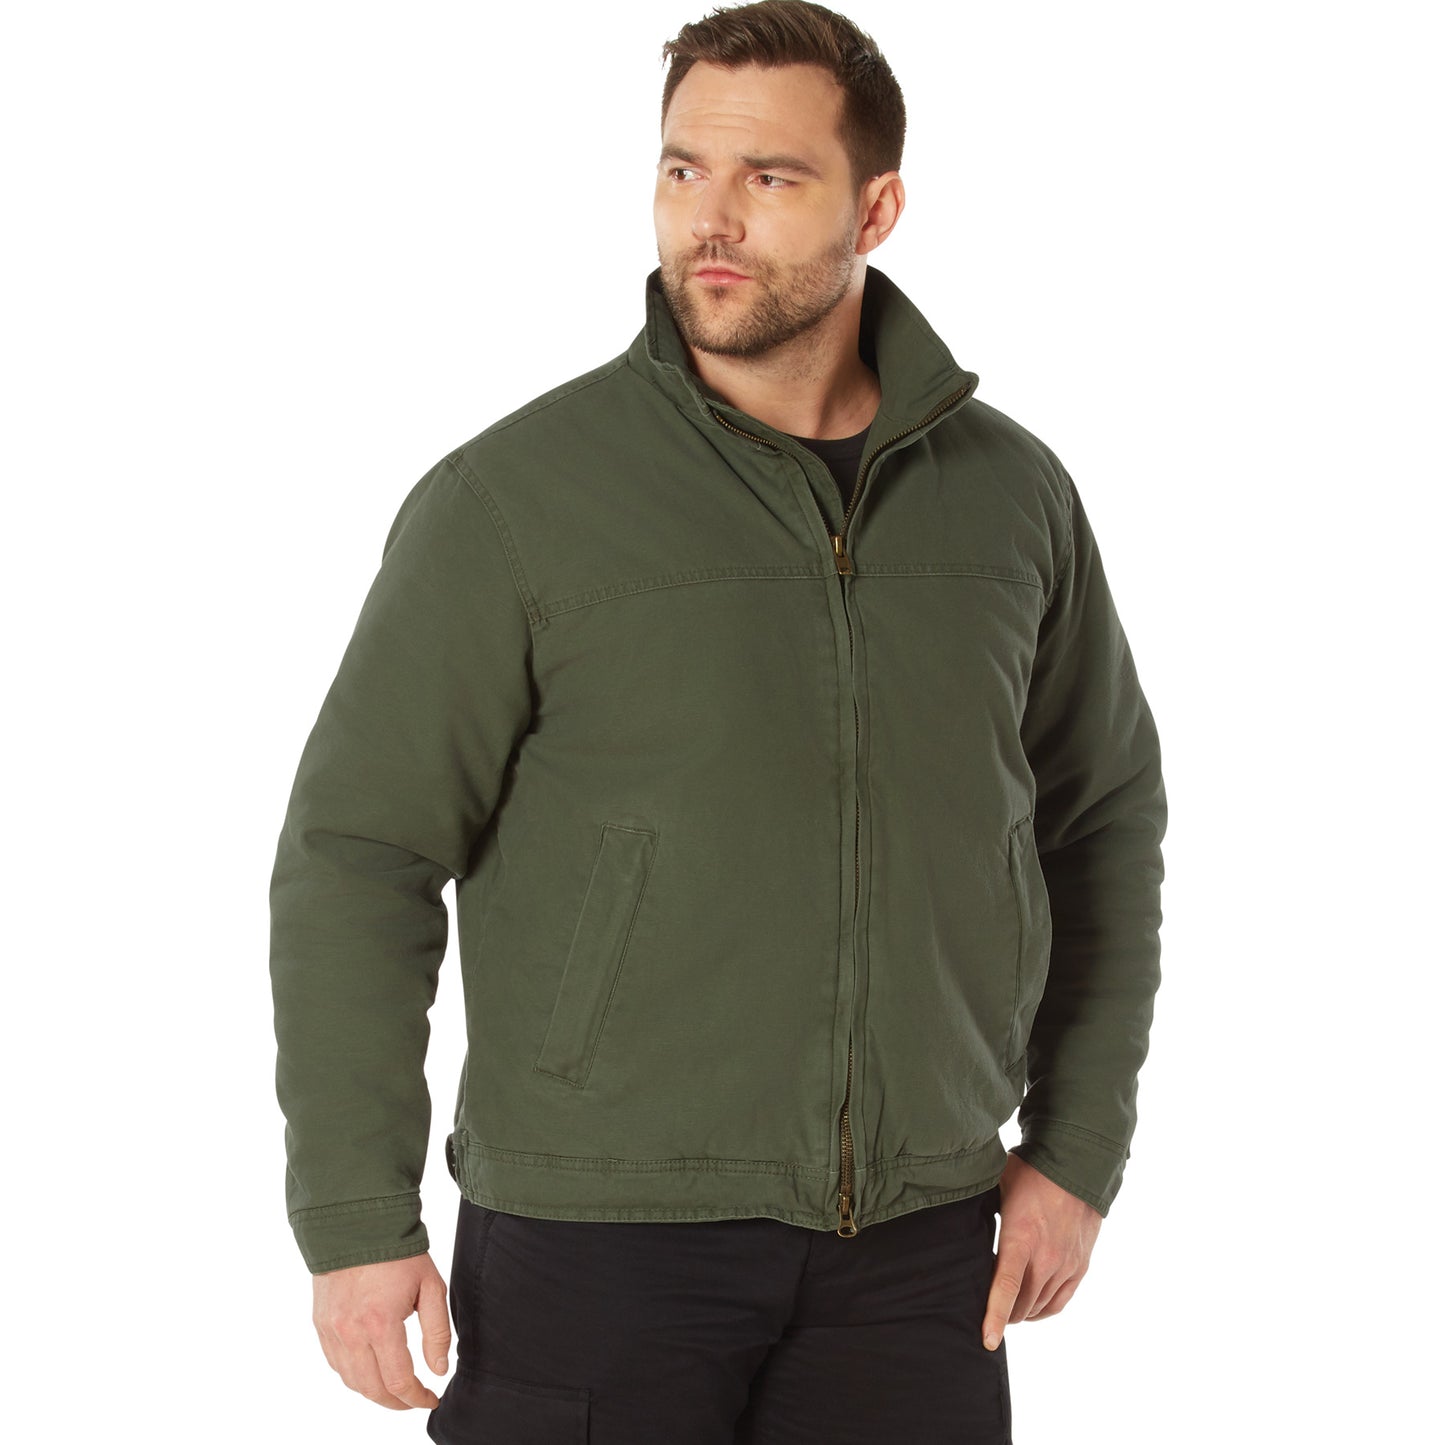 Rothco Concealed Carry 3 Season Jacket - Olive Drab